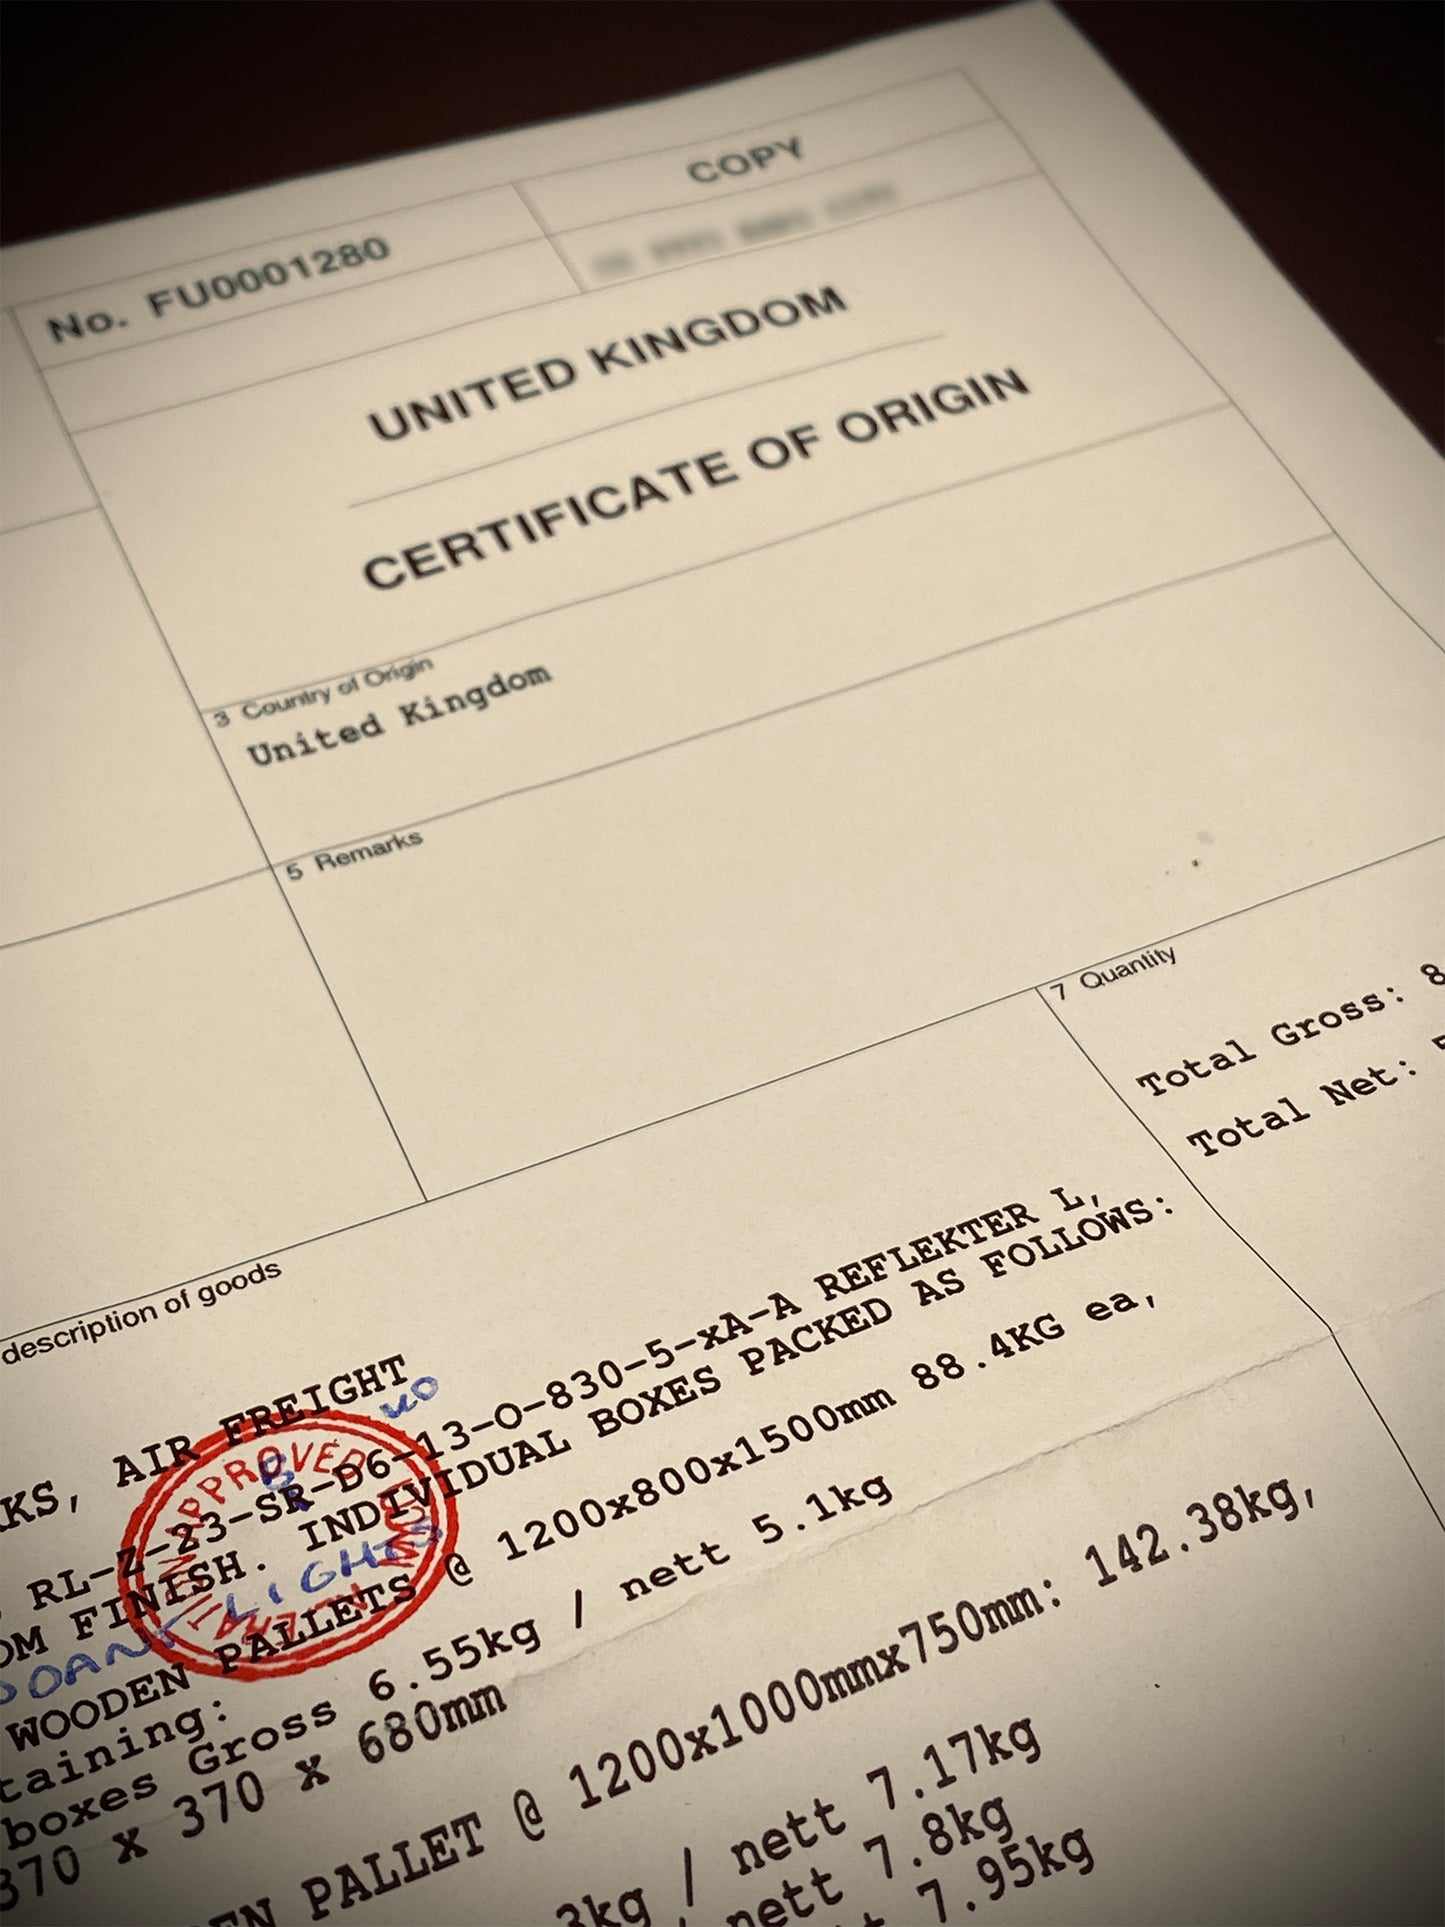 Stamped and signed Certificate of Origin, required by customs authorities of the importing country